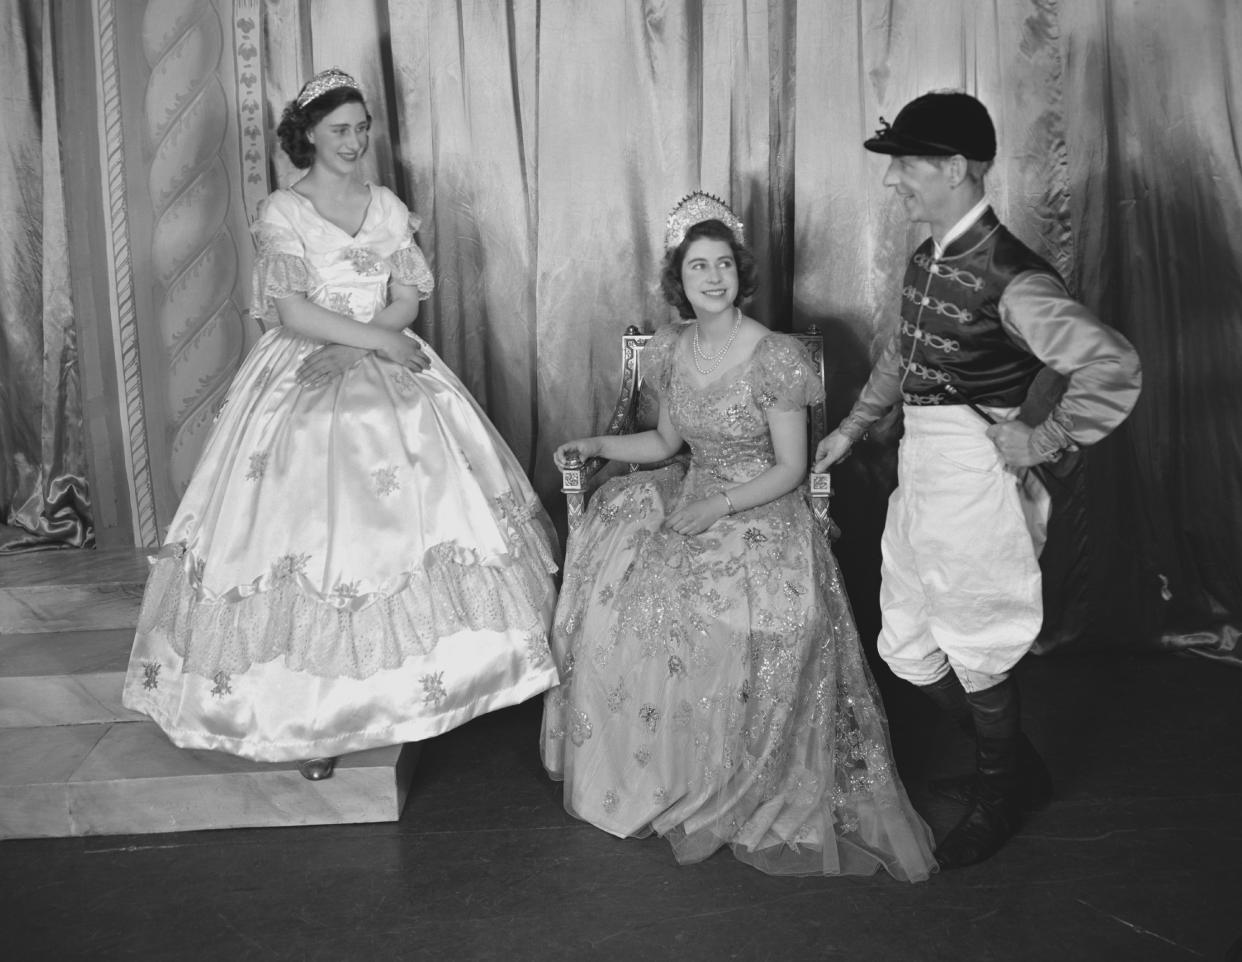 Princess Margaret (1930-2002) and Princess Elizabeth (Queen Elizabeth II), both dressed in elaborate gowns, pictured alongside a fellow performer during a royal pantomime production of 'Old Mother Red Riding Boots' at Windsor Castle, Berkshire, Great Britain, 22 December 1944. (Photo by Lisa Sheridan/Studio Lisa/Getty Images)